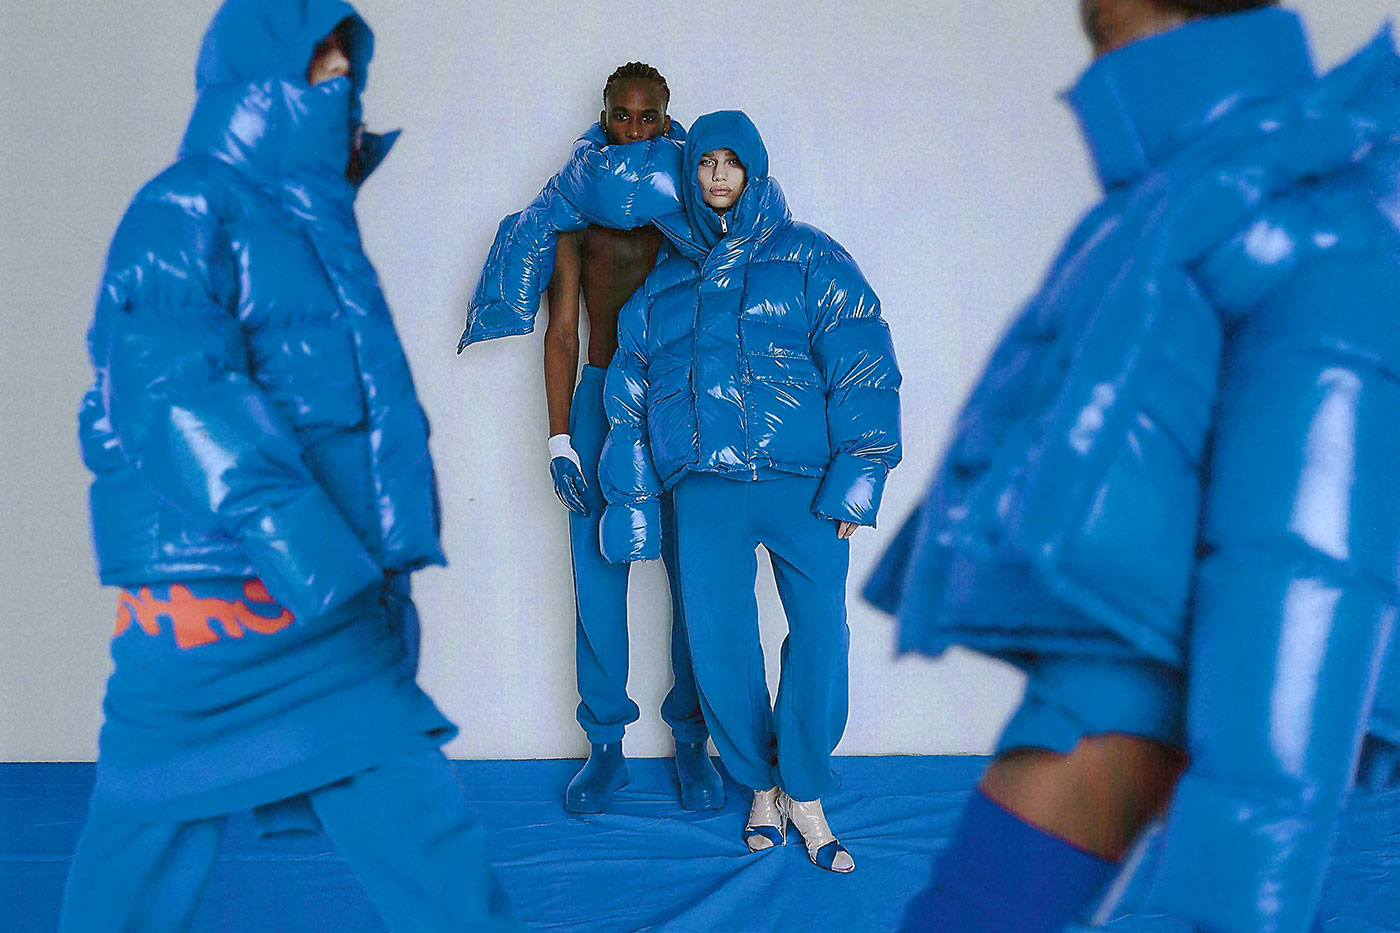 Inflatable puffer jackets are here in case you need more attention -  Fashion Journal